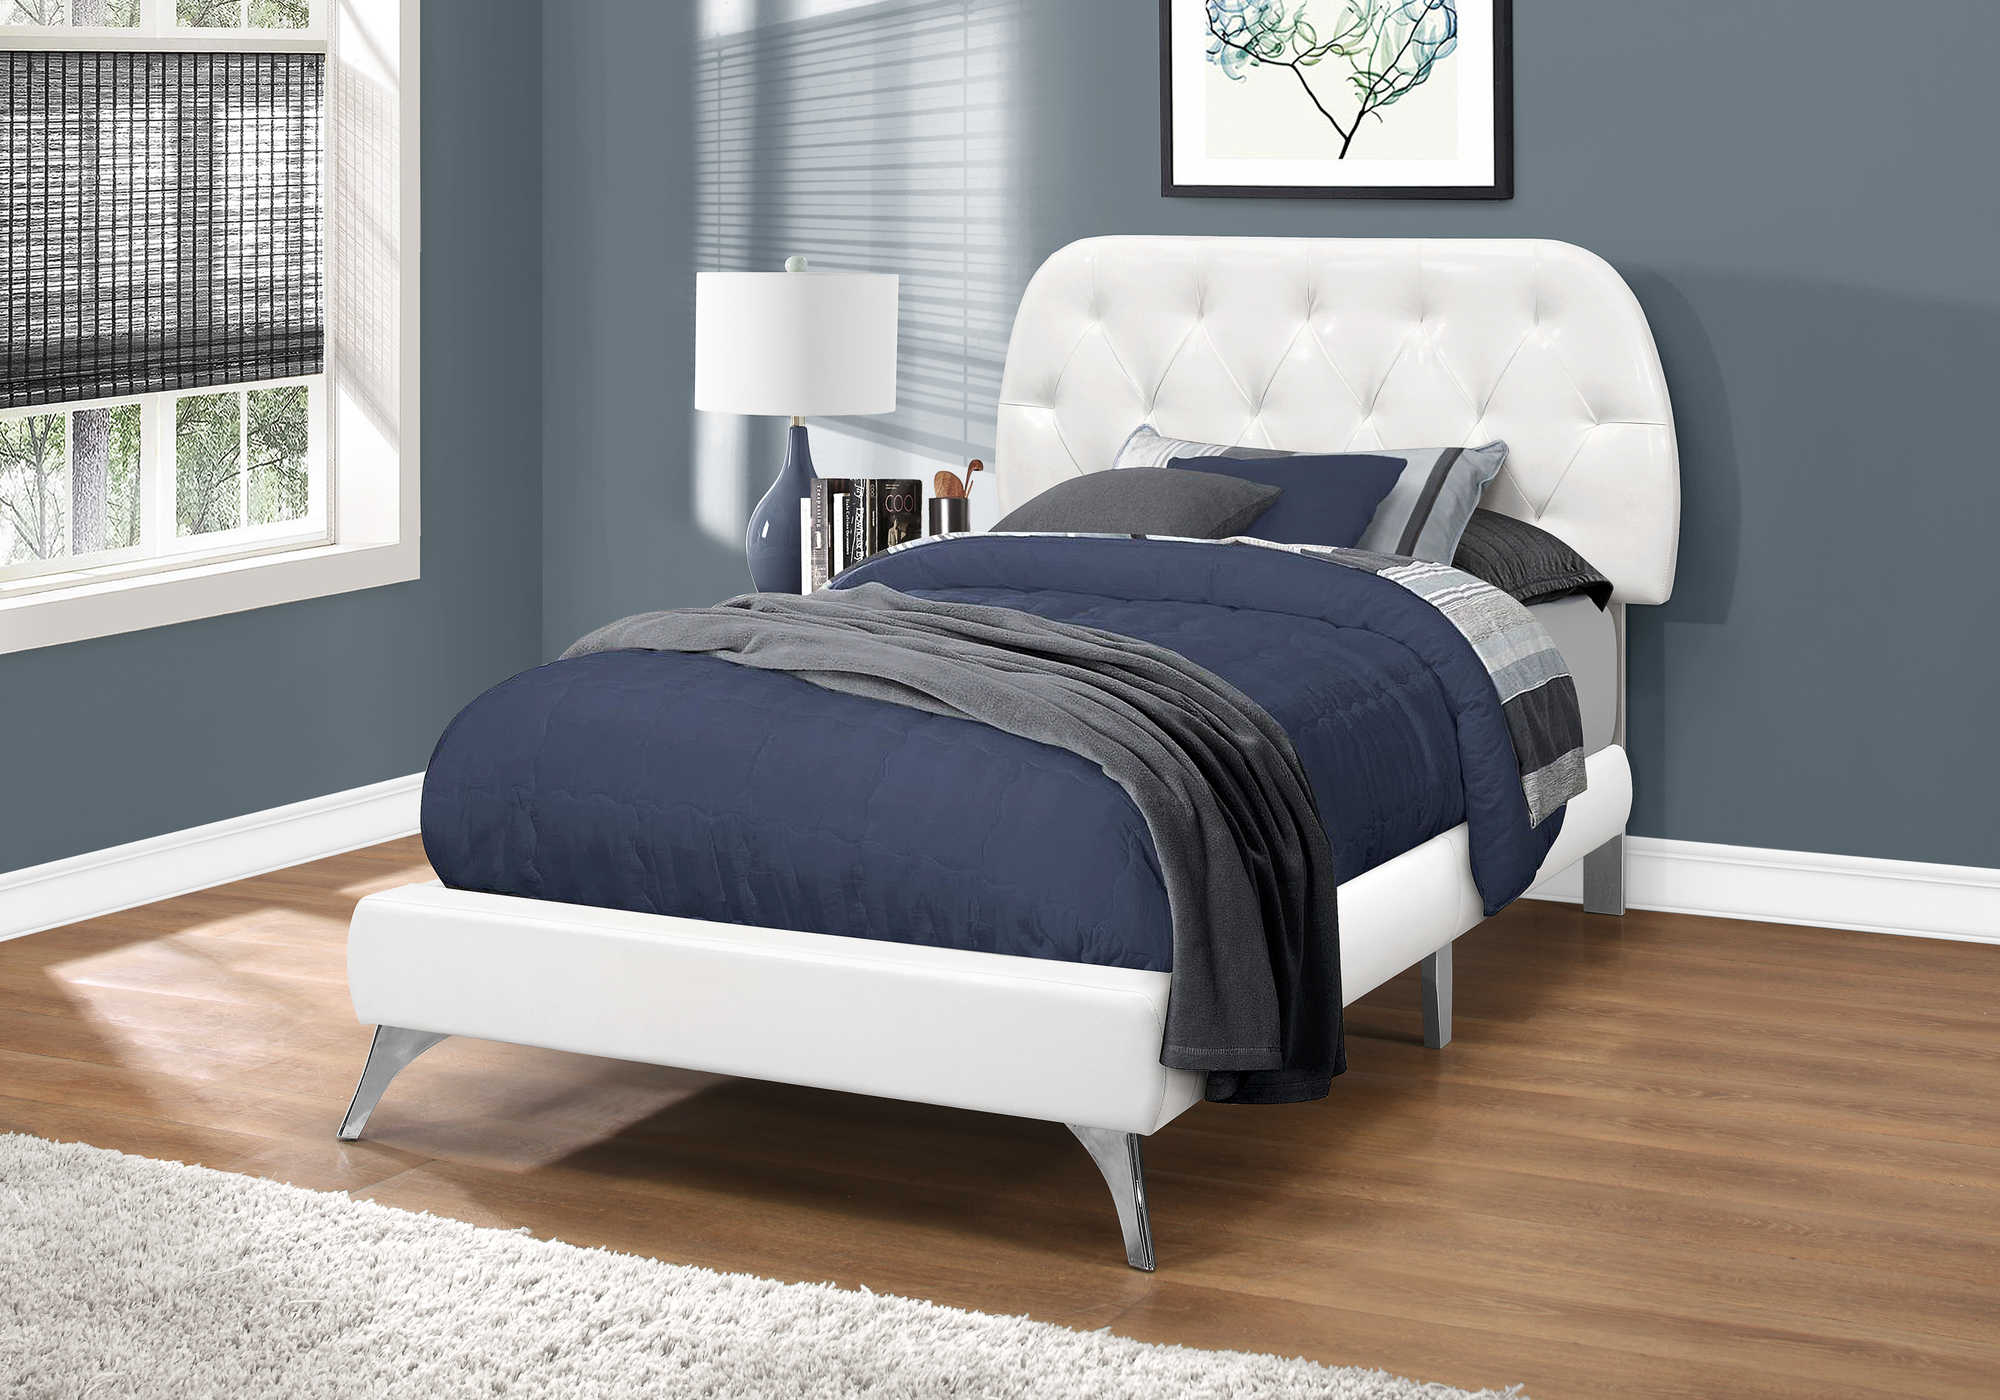 BED - TWIN SIZE / WHITE LEATHER-LOOK WITH CHROME LEGS